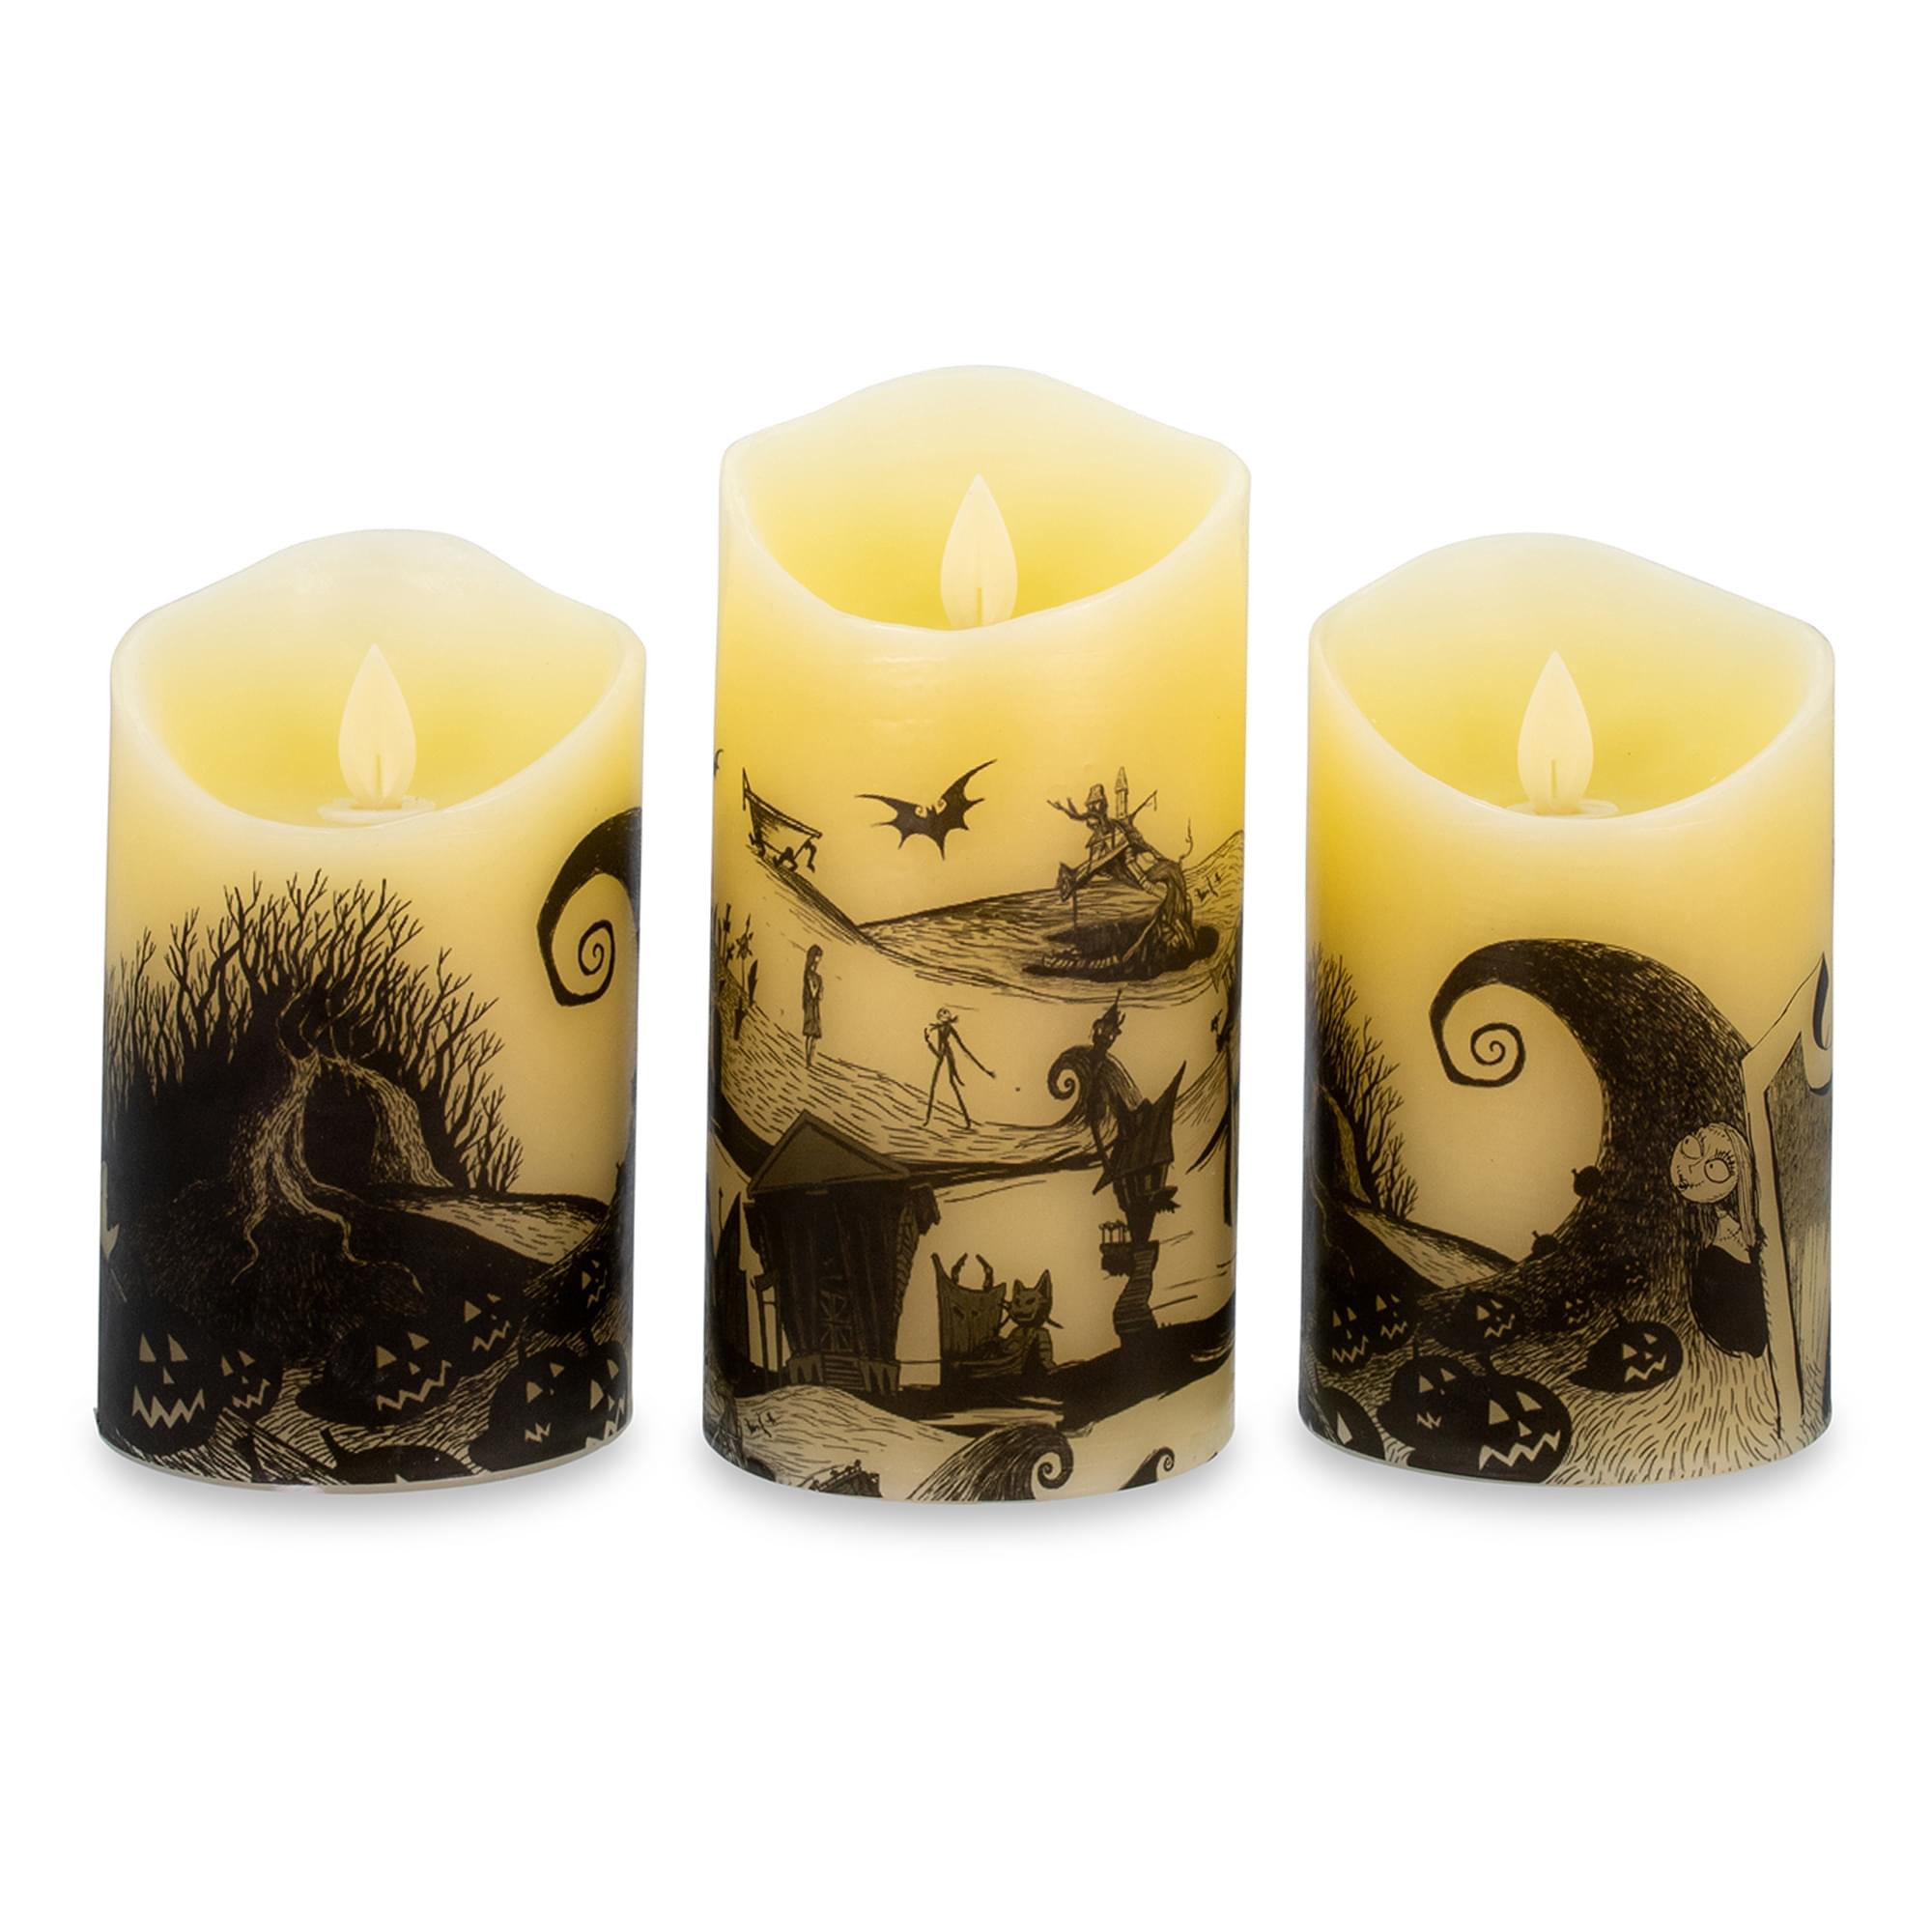 NBX Flickering LED Candles | Set of 3 | Free Shipping